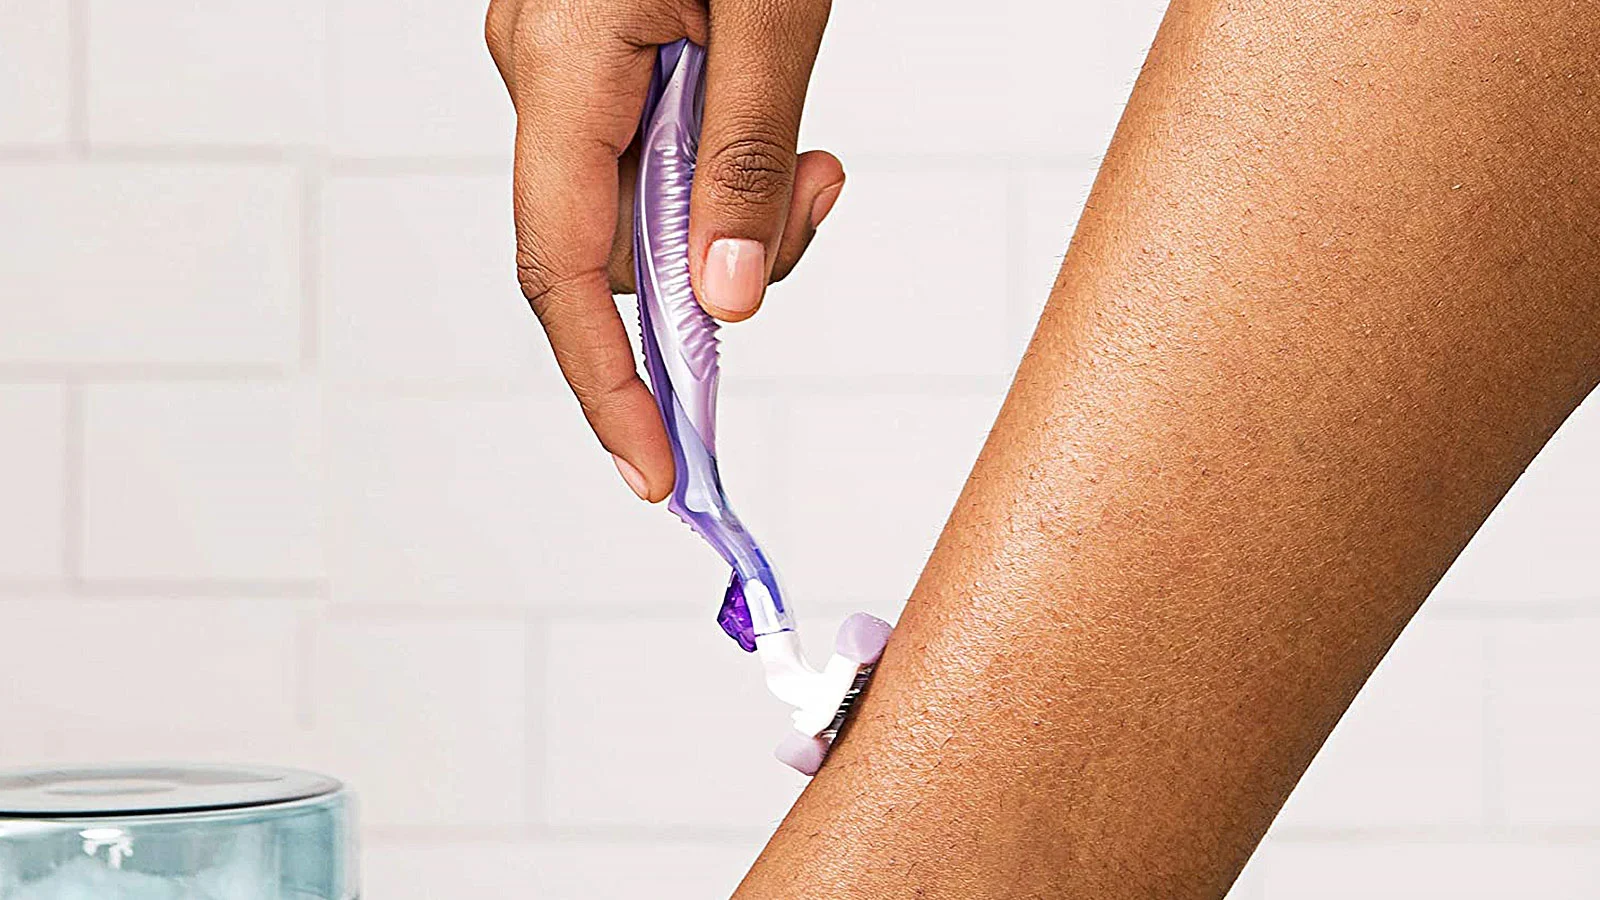 Shaving in the direction of hair growth